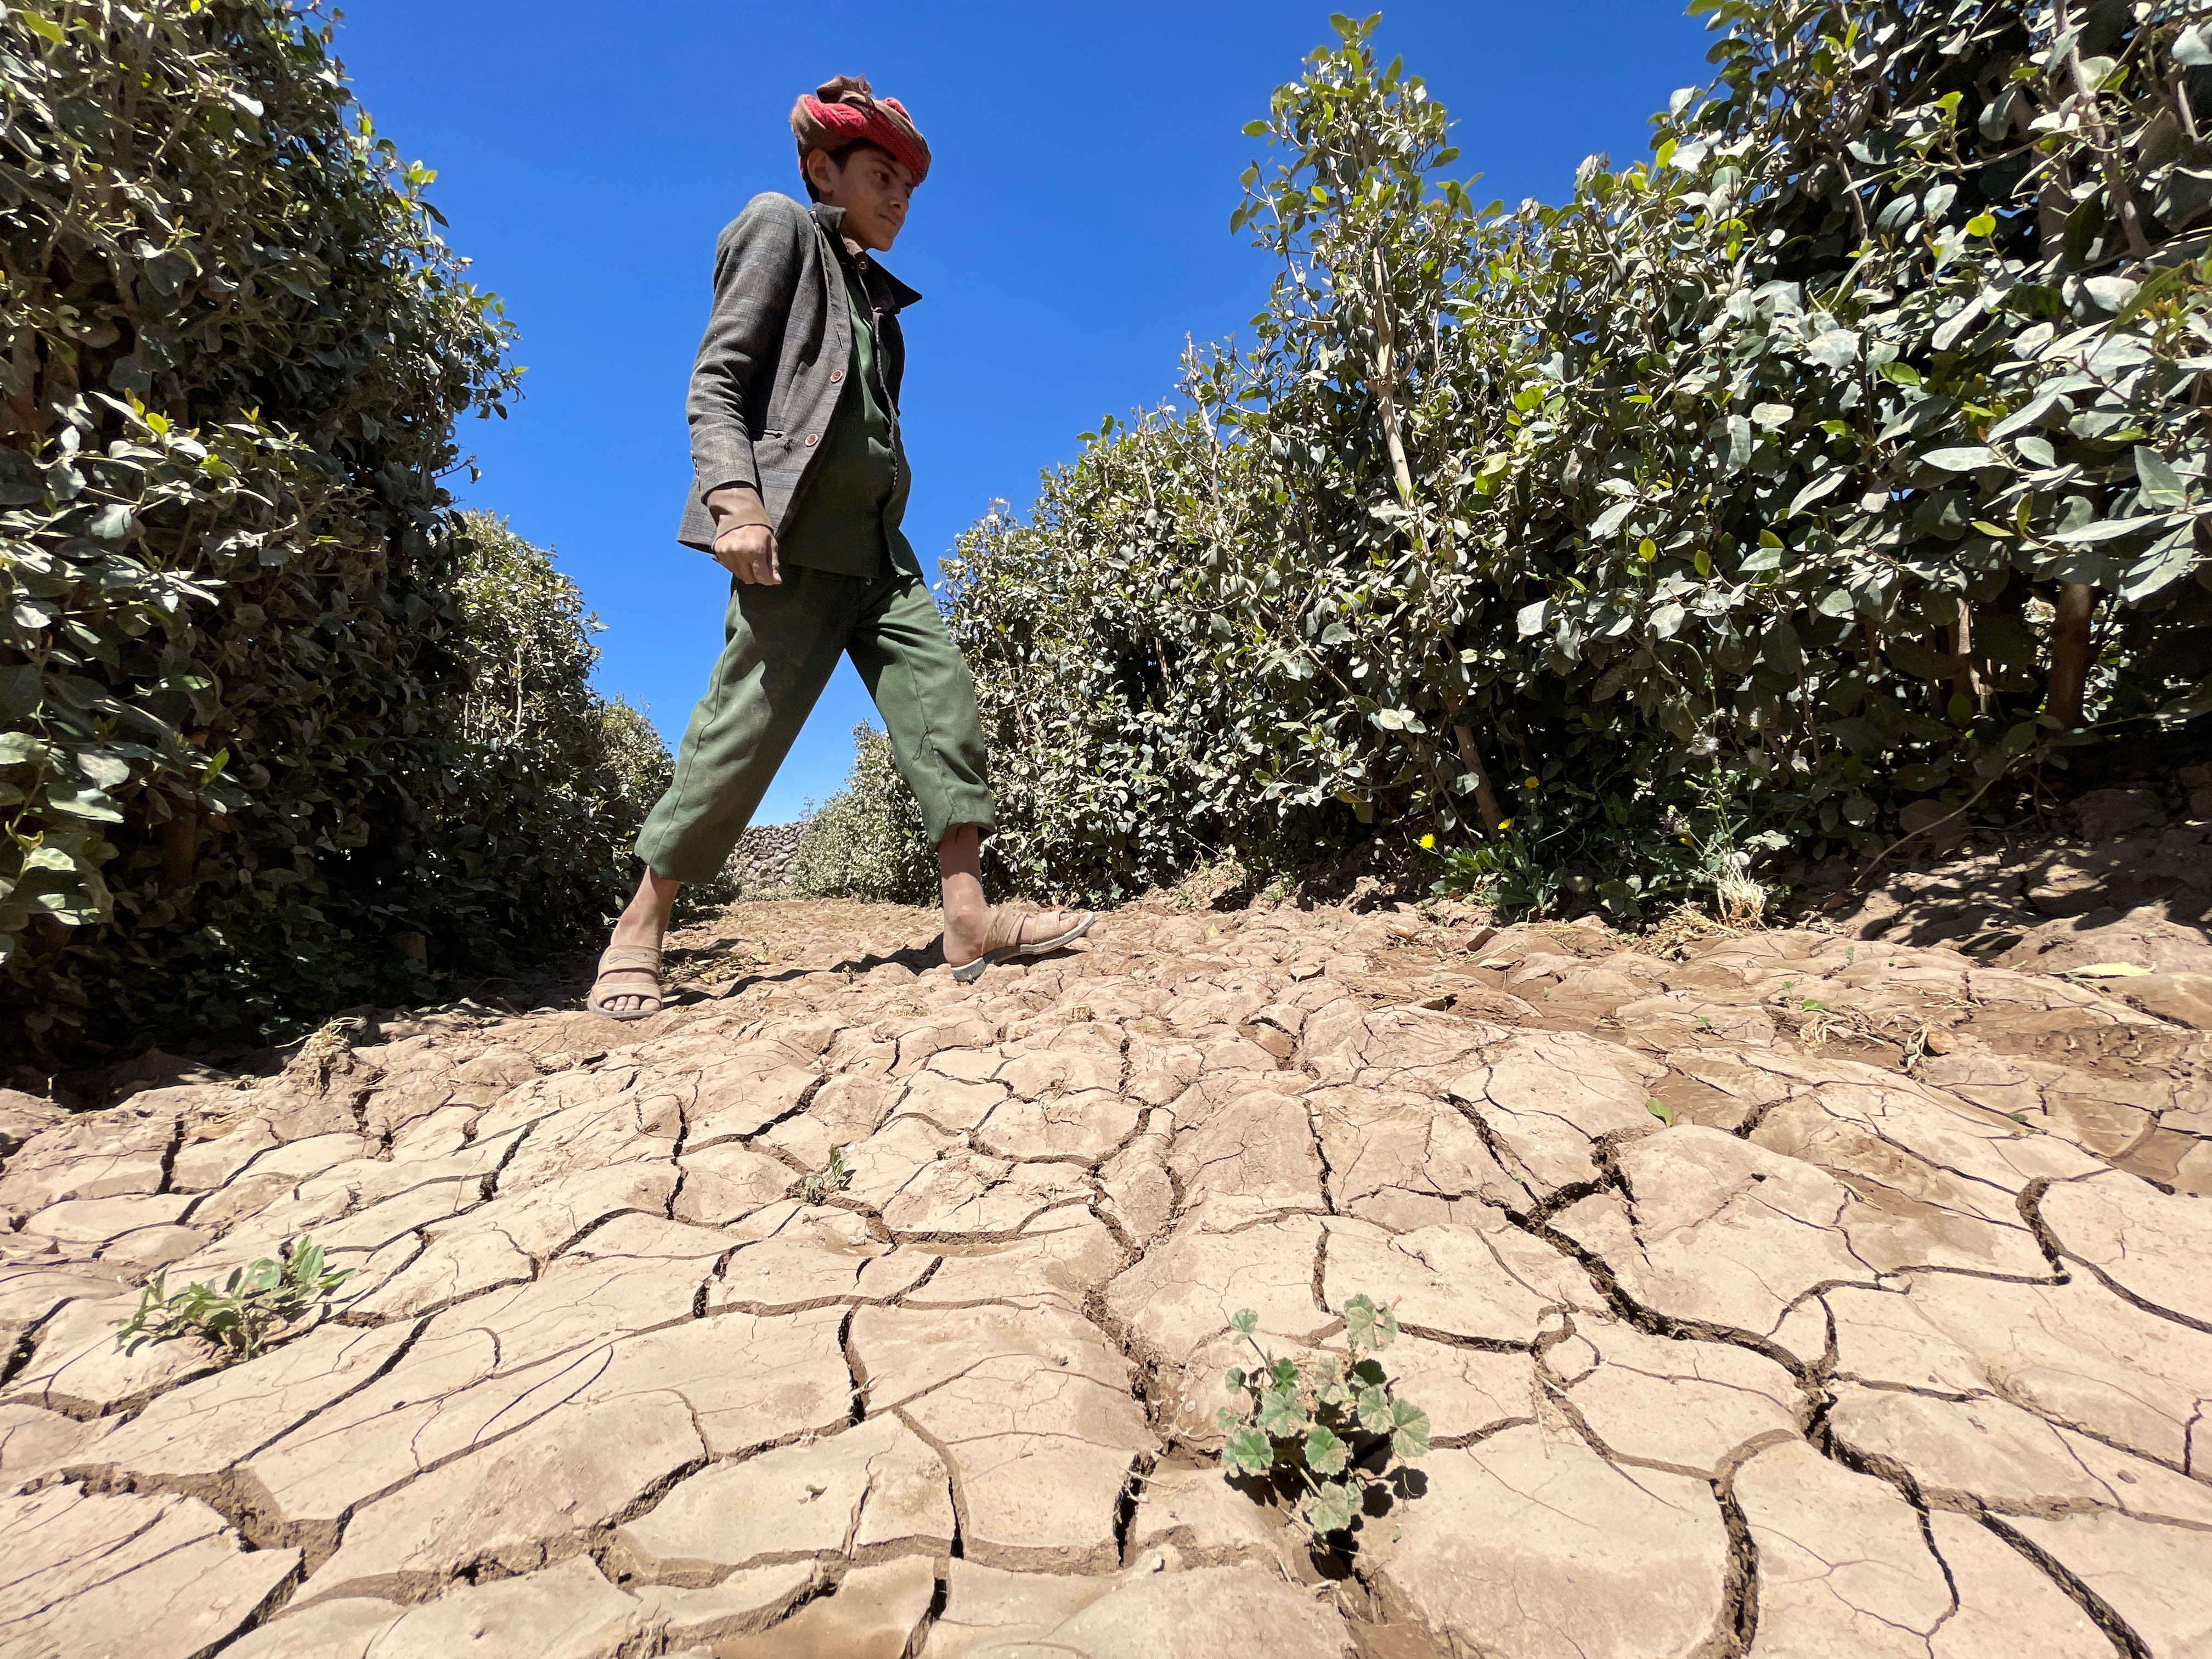 Farmers drain groundwater and remove soil to cultivate qat on the outskirts of Sanaa